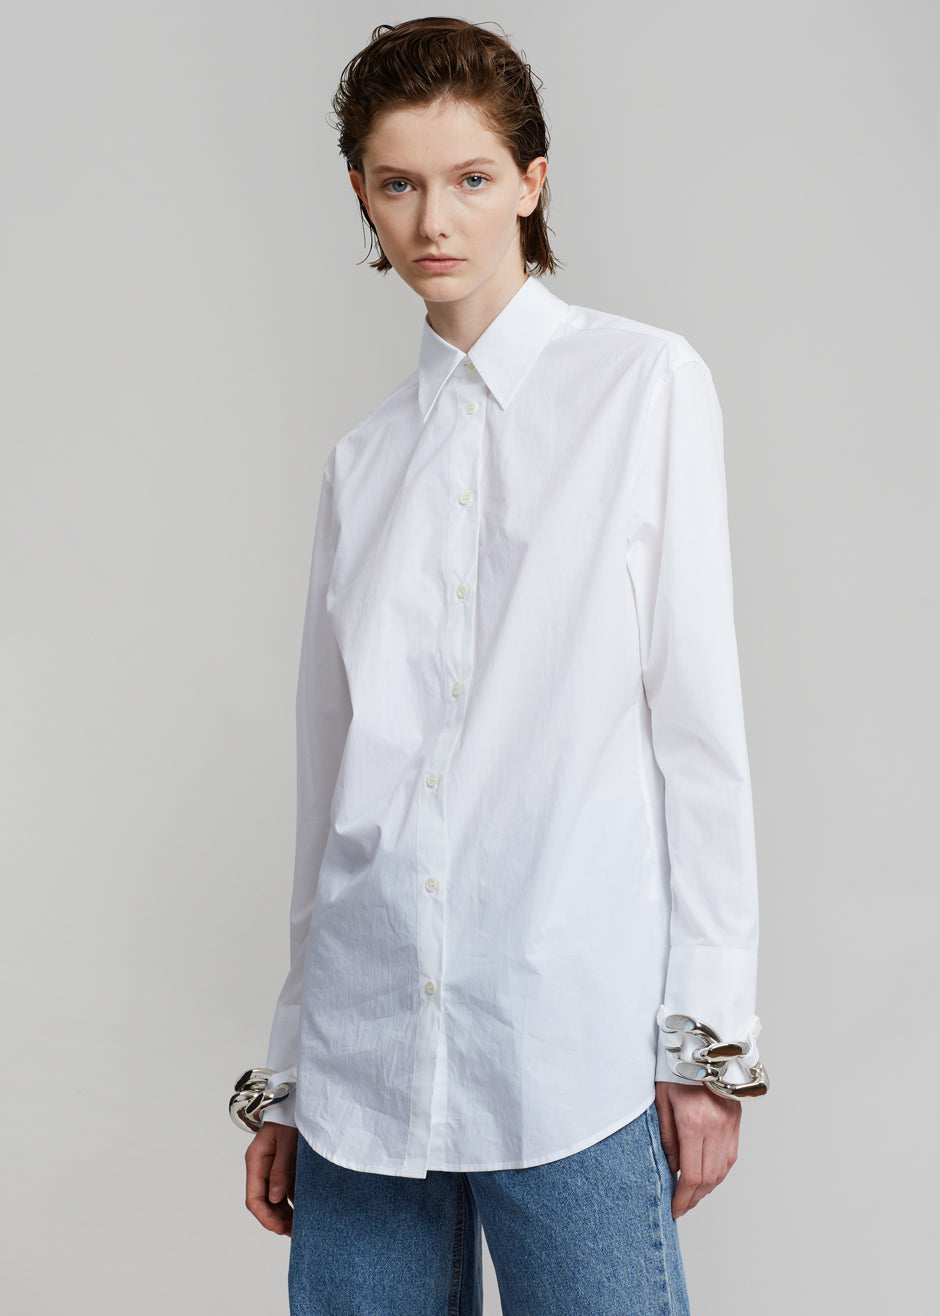 JW Anderson Silver Chain Link Shirt - White - 5